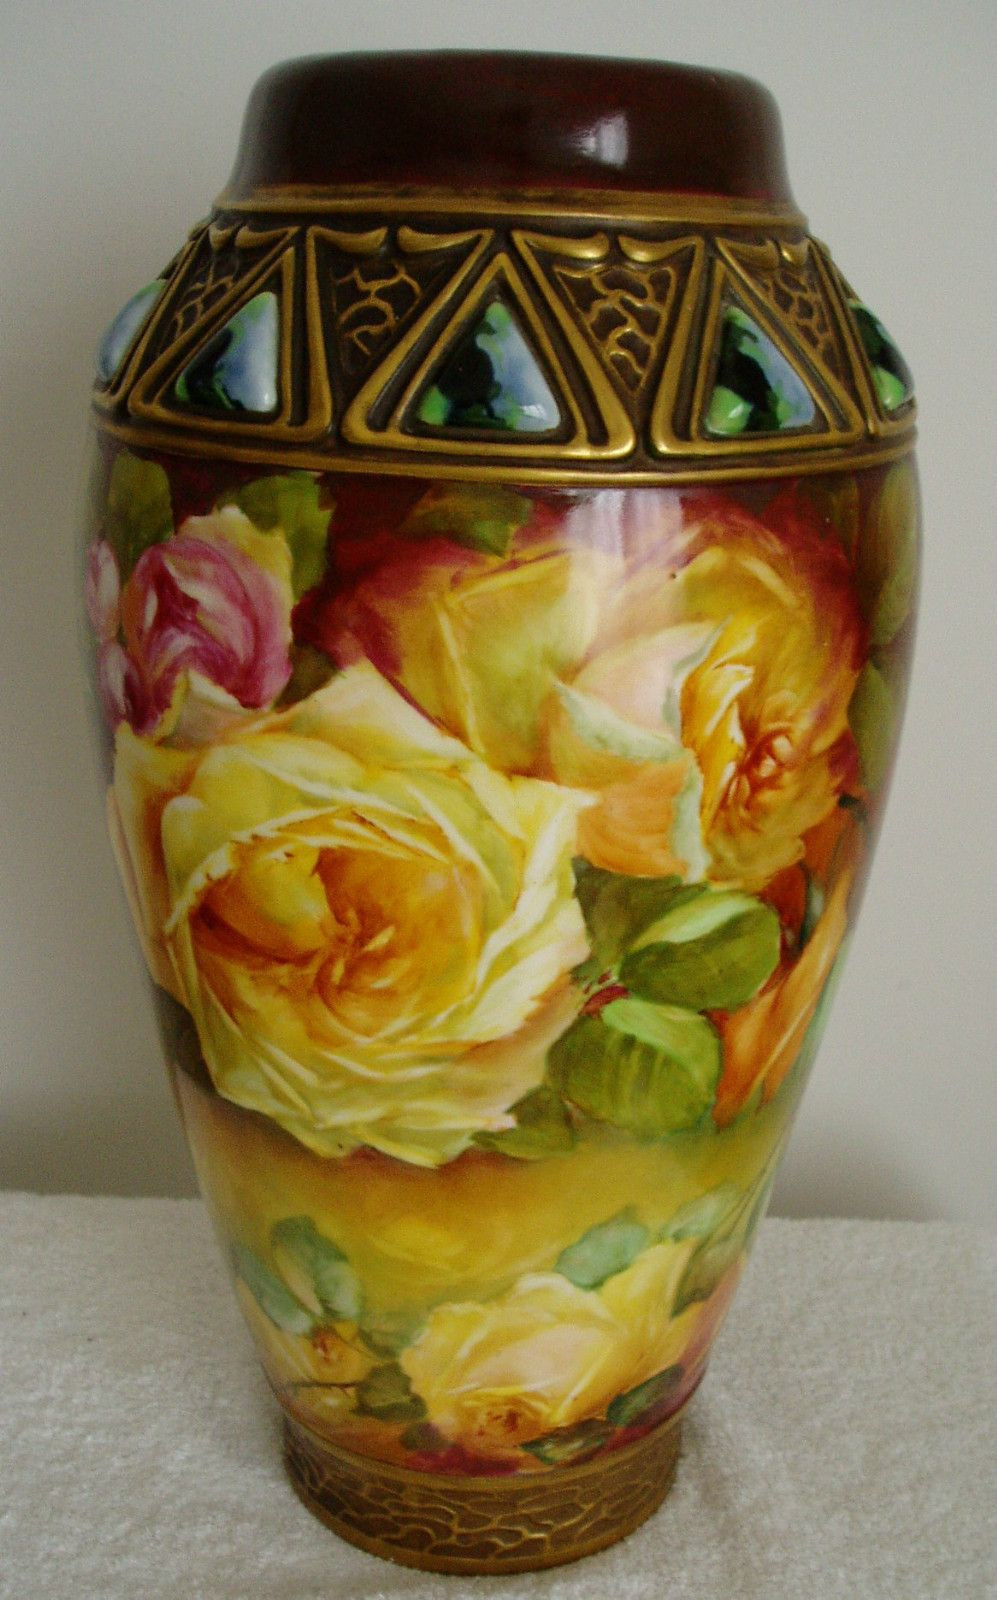 25 Fashionable Large Roseville Vase 2022 free download large roseville vase of habsburg austria vintage large art pottery vase hand painted roses with regard to habsburg austria vintage large art pottery vase hand painted roses ebay